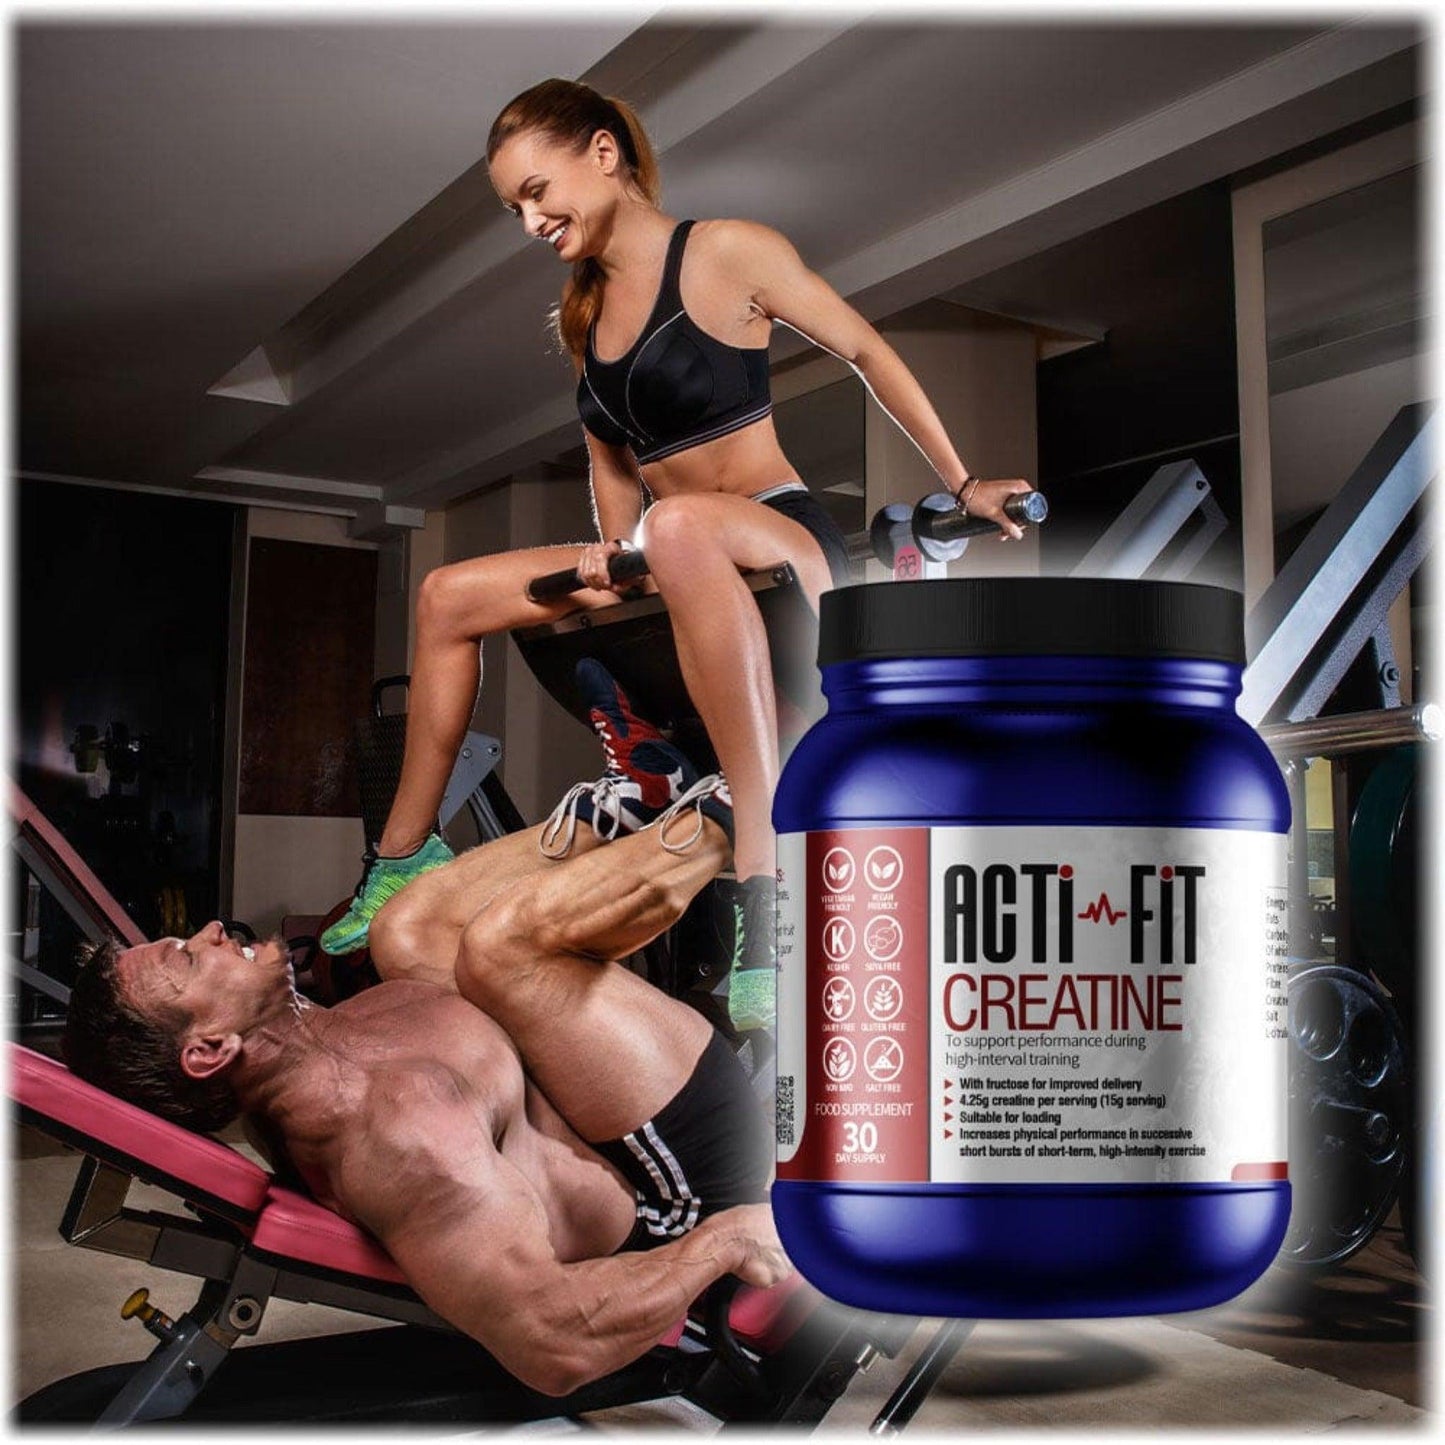 Acti-Fit's Creatine tub next to man and woman working out in the gym 